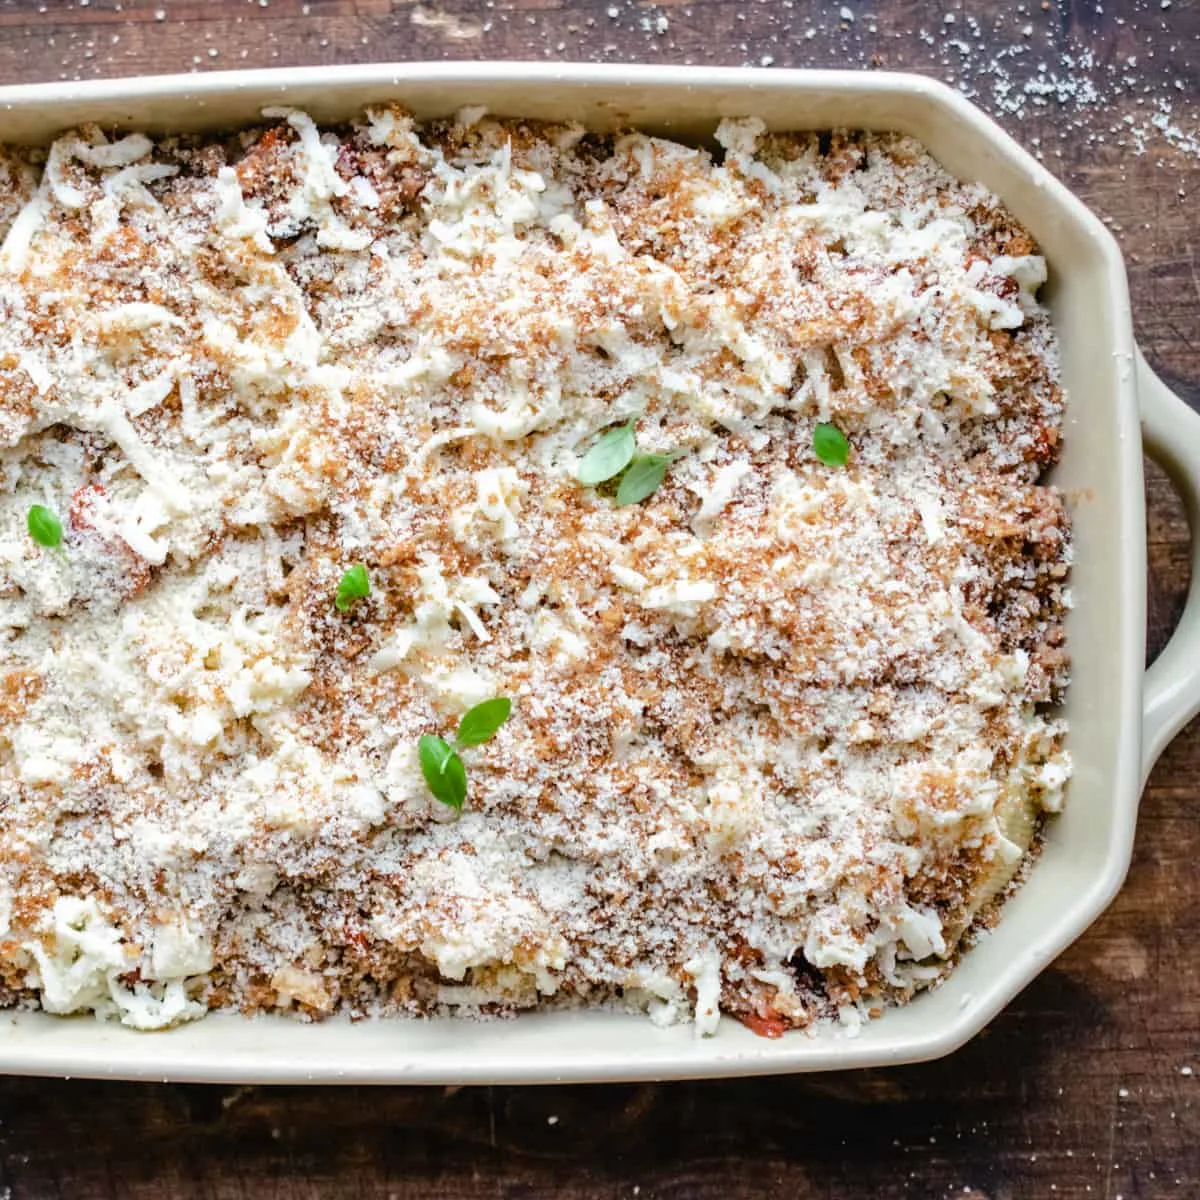 Stuffed pasta shells with mozzarella, bread crumbs and basil leaves on top.